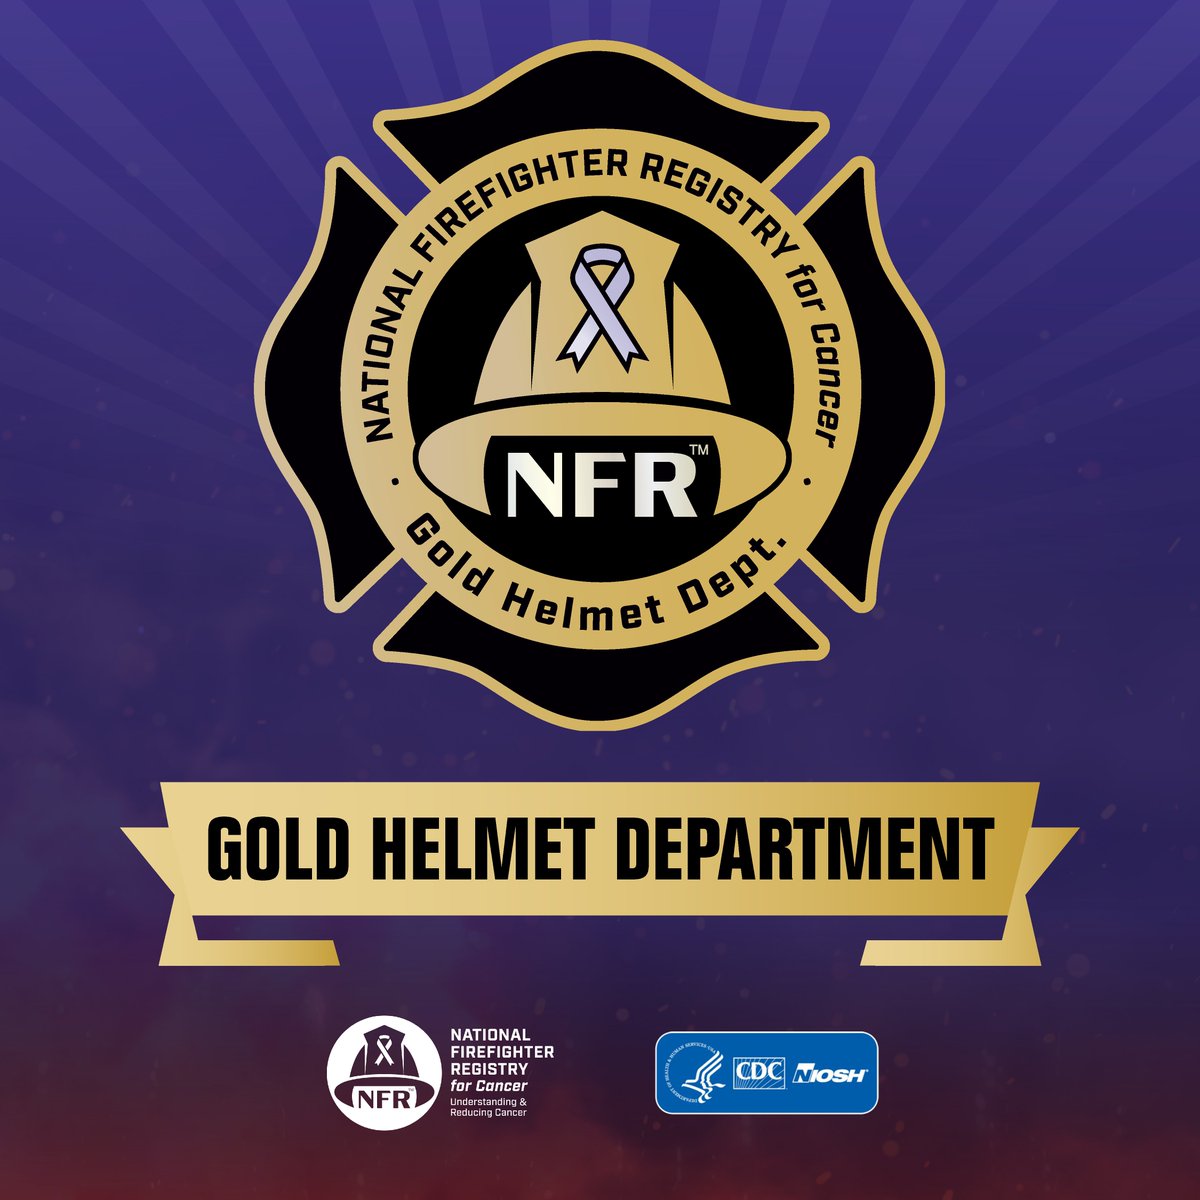 Become a Gold Helmet Department: U.S. fire departments with at least 50% or more than 300 firefighters signed up for the #NationalFirefighterRegistry (NFR) for #Cancer are recognized. Find out how to get involved: bit.ly/3vExPzK #NFRGoldHelmet